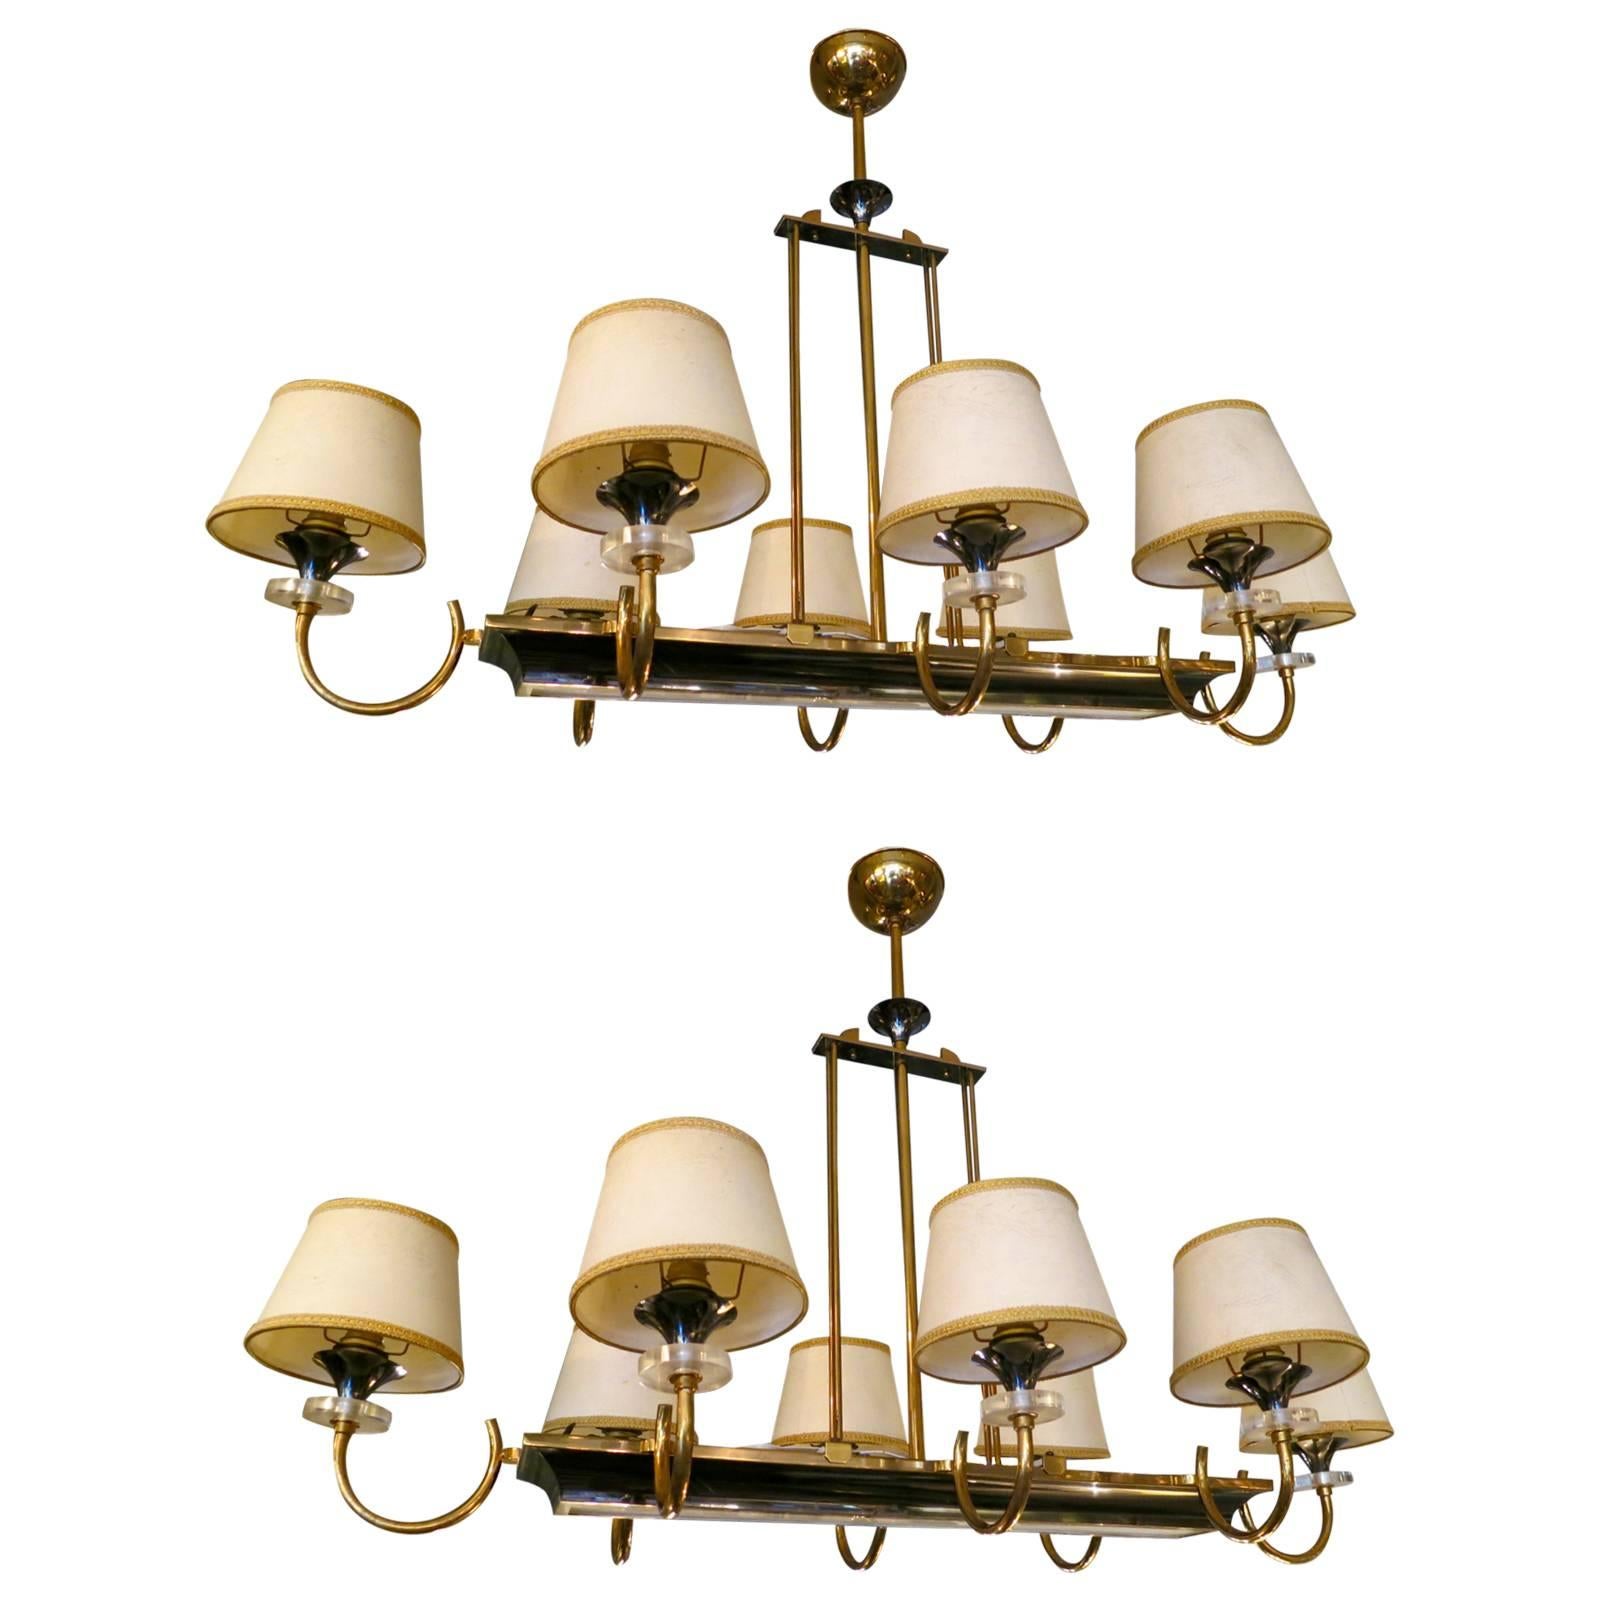 Pair of French Brass, Gunmetal and Lucite Chandeliers Attributed to Jansen